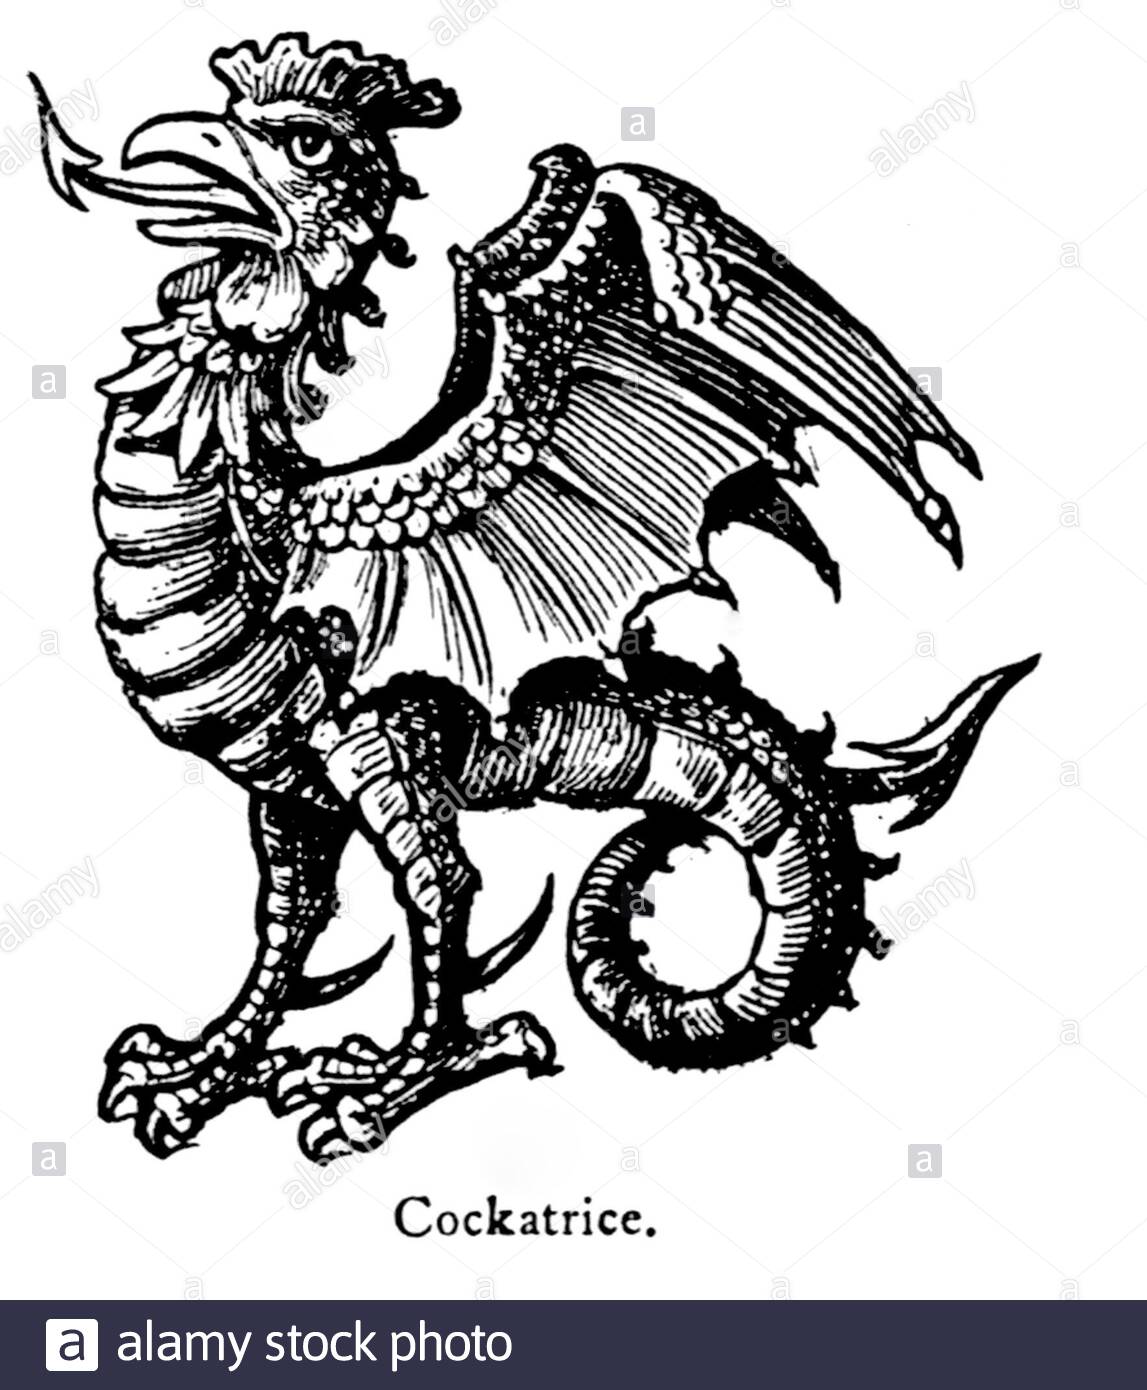 Cockatrice, vintage illustration from 1900 Stock Photo